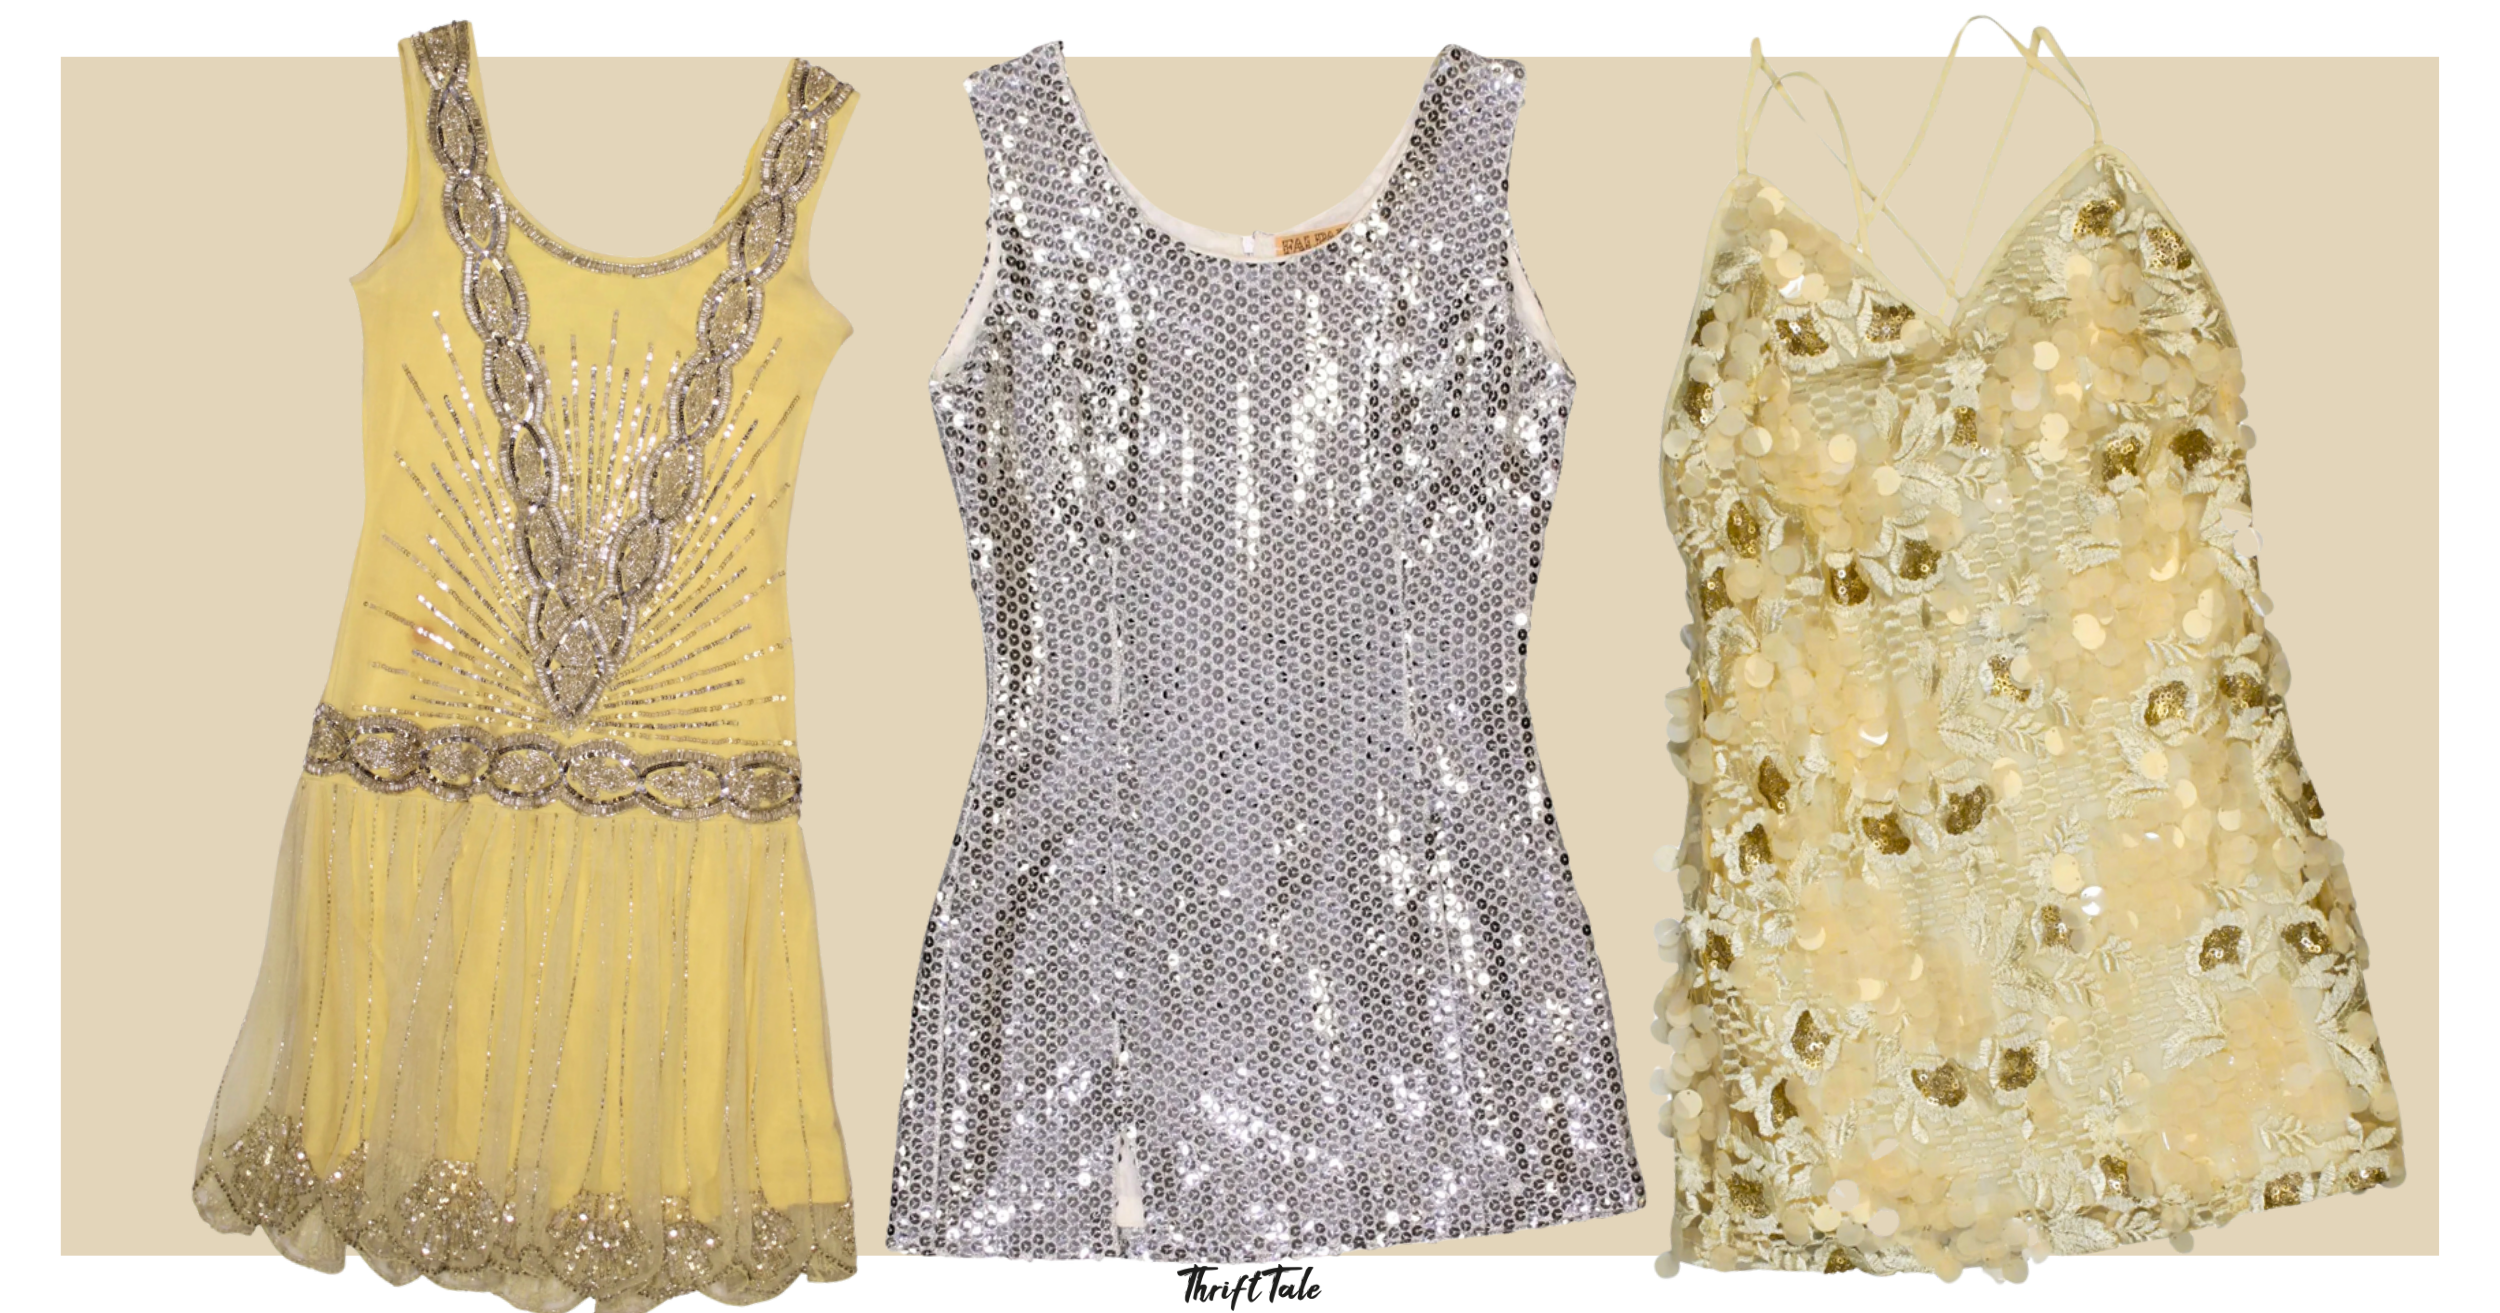 Taylor Swift Fearless dresses